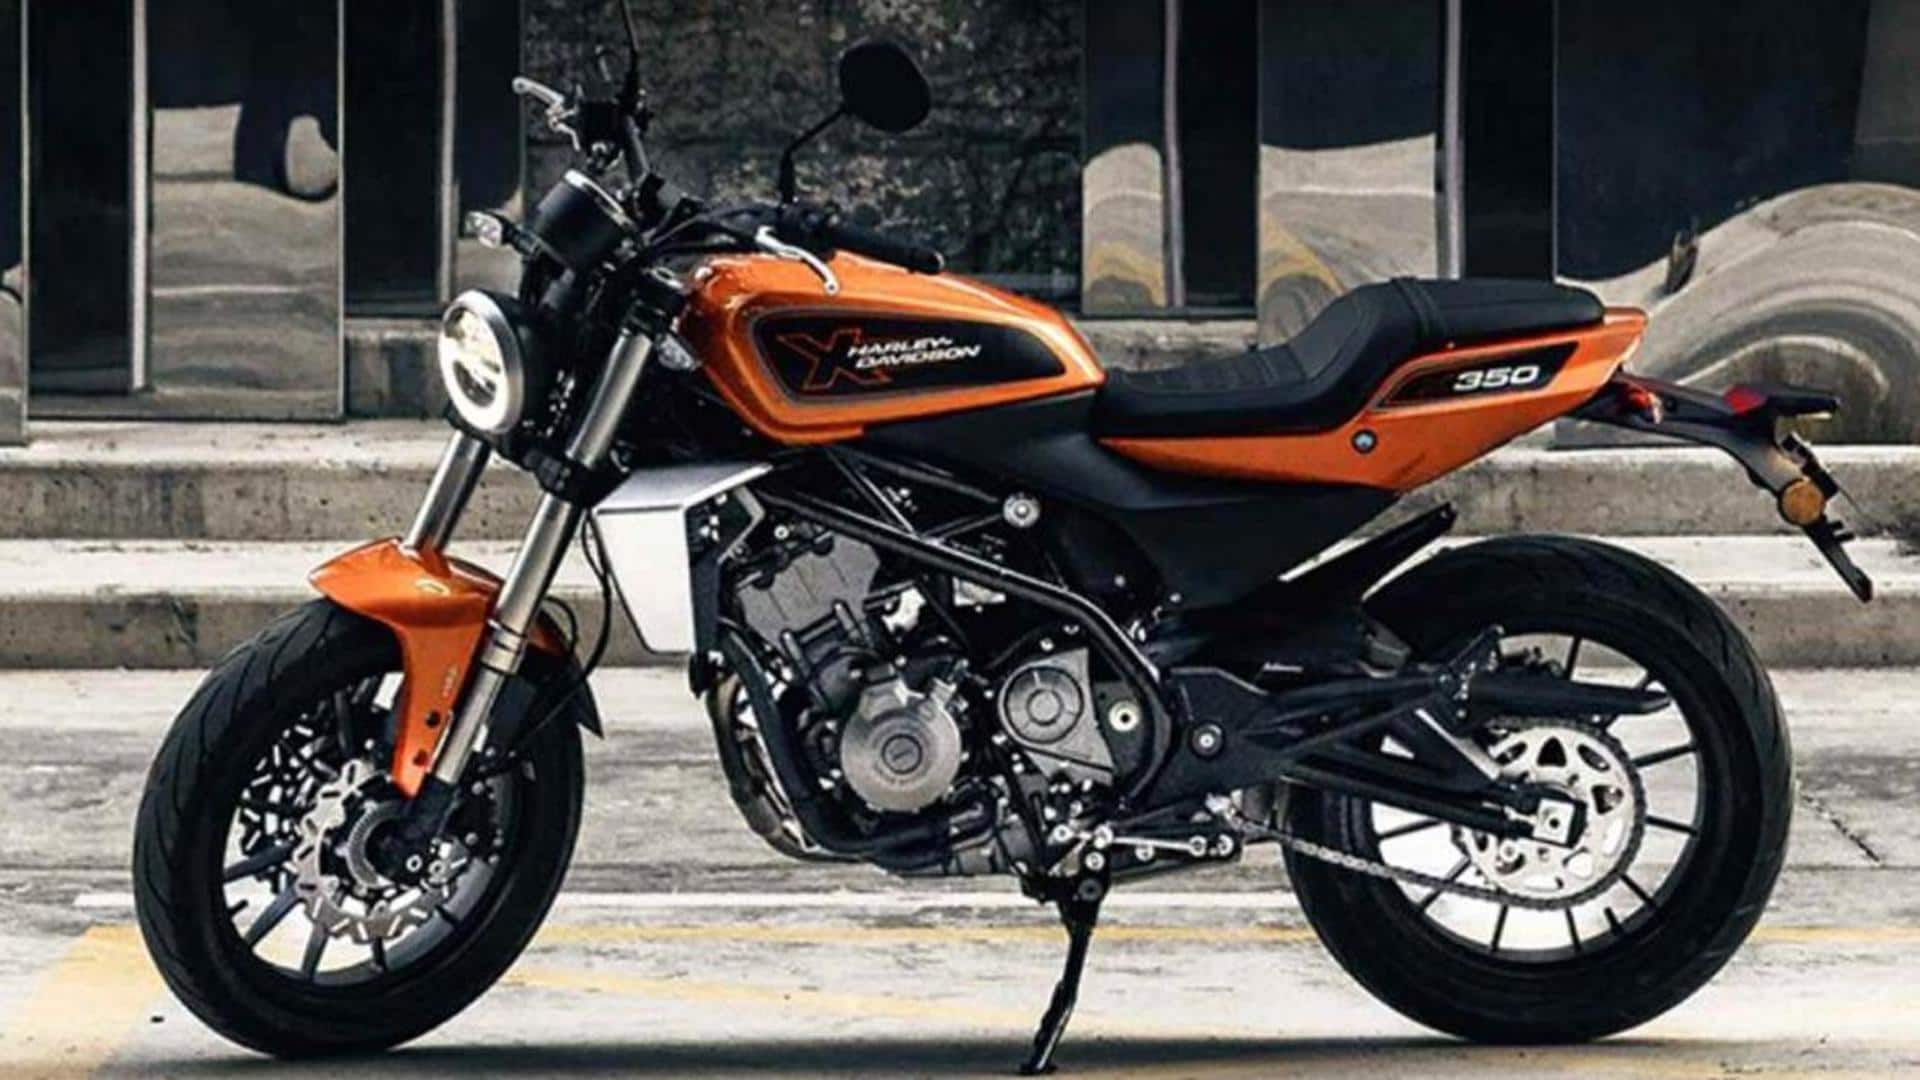 Top 5 rivals of the Harley-Davidson X350 in India